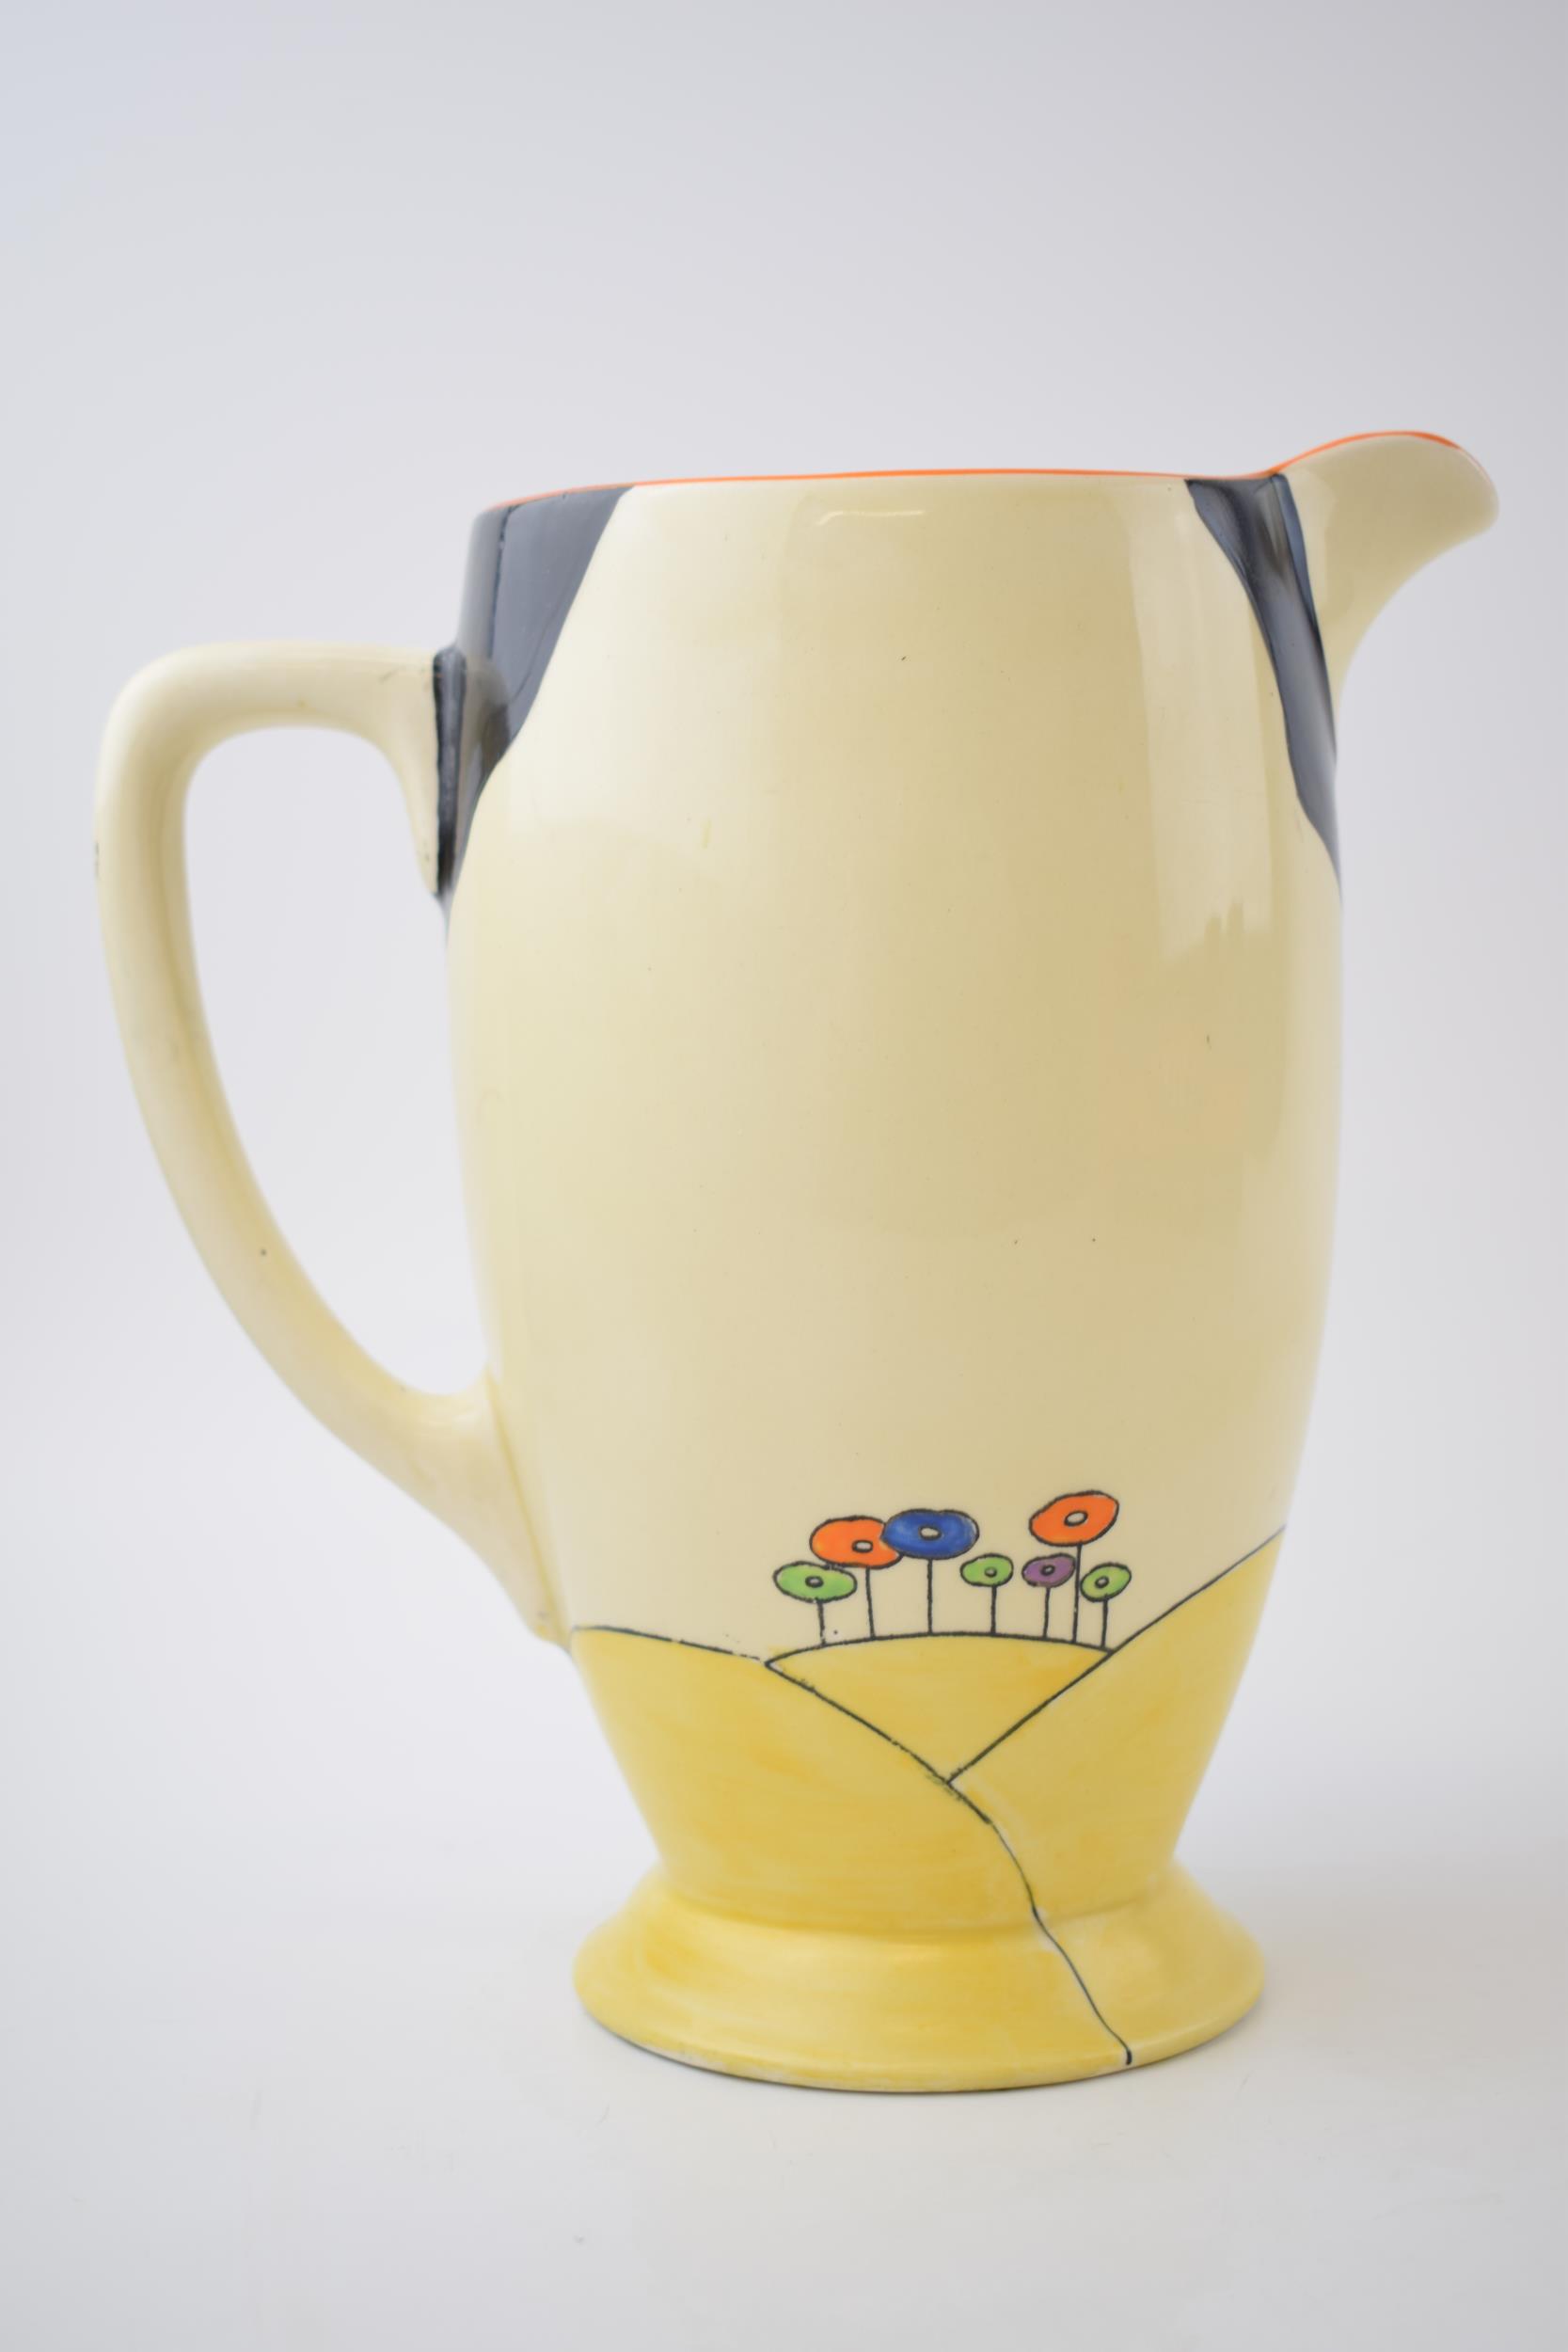 Clarice Cliff water jug in the 'Woodland' pattern, 20cm tall, printed marks to base. Displays - Image 2 of 7